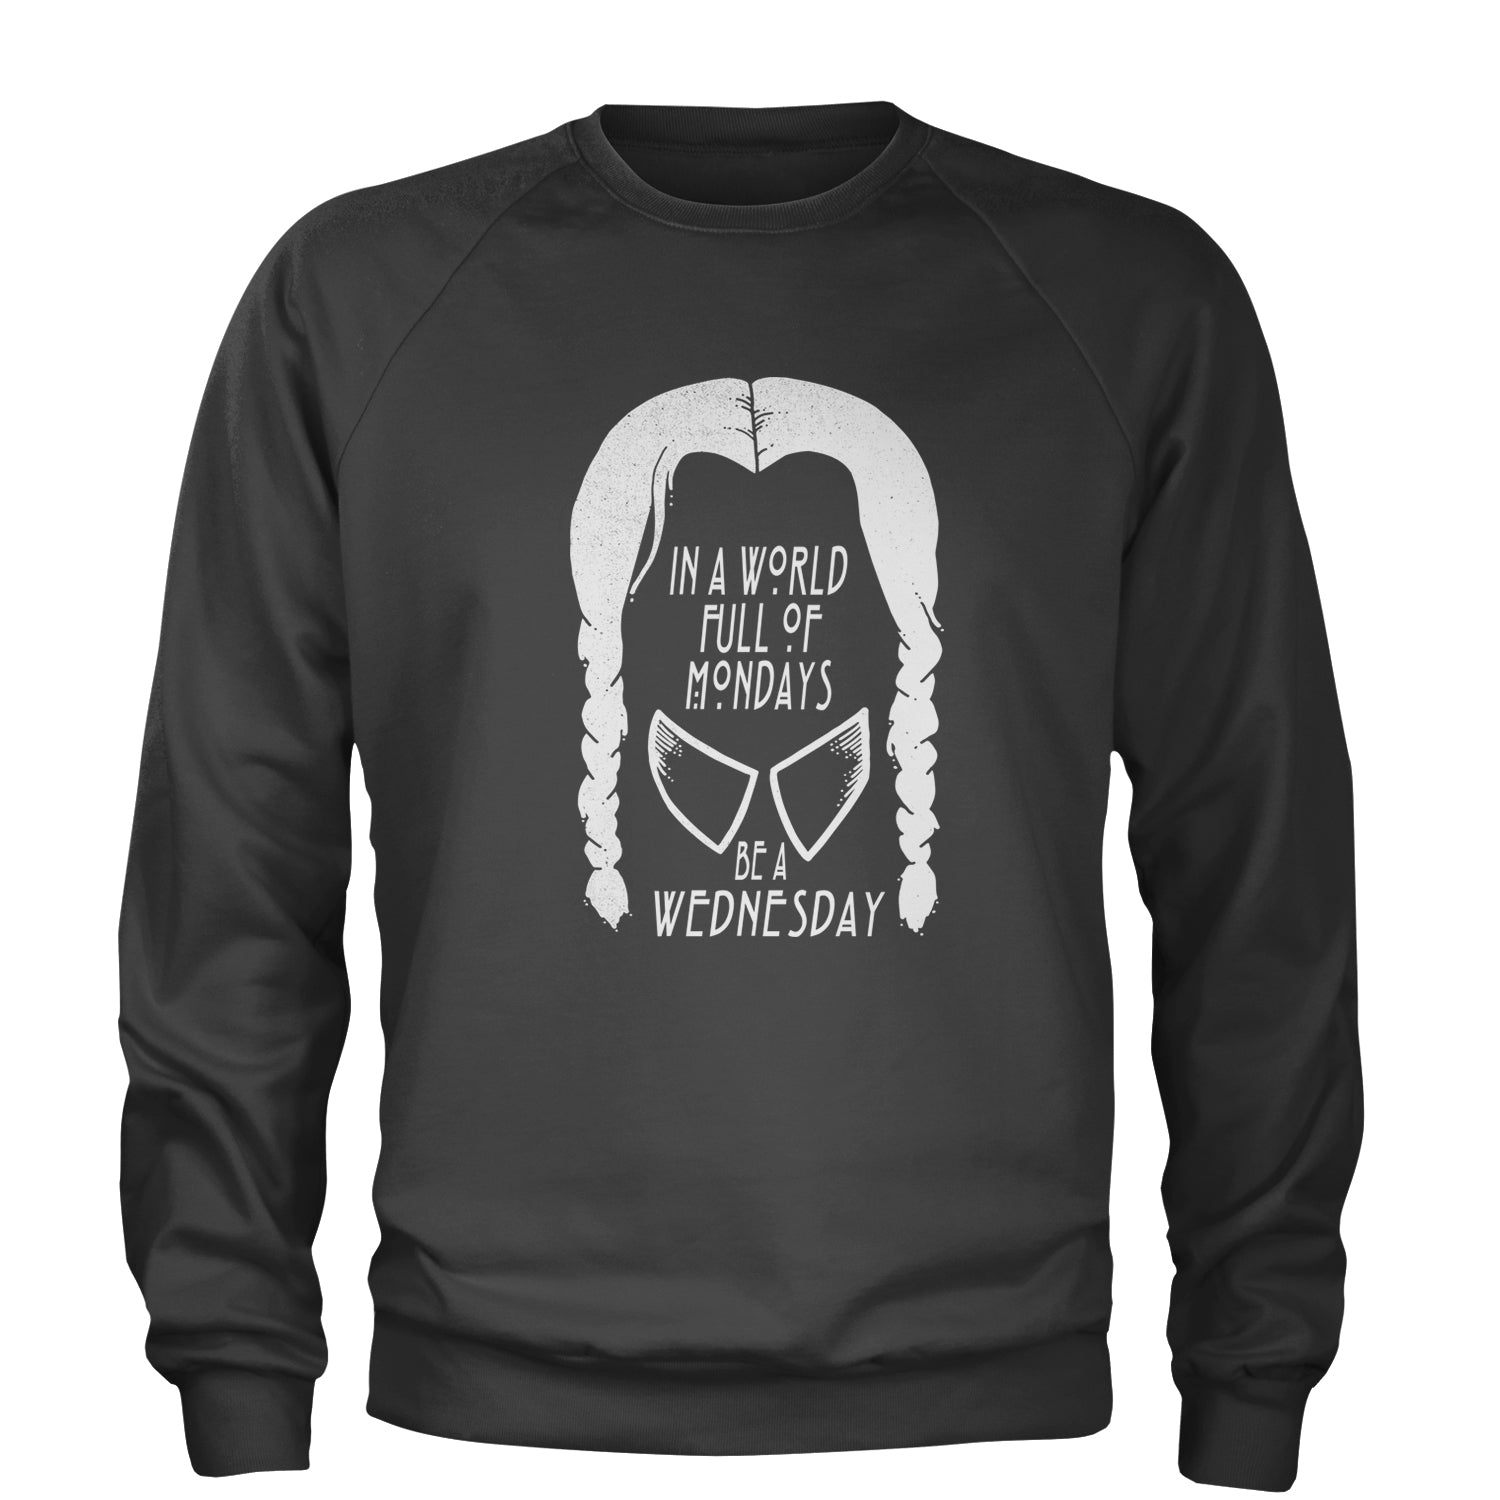 In A World Full Of Mondays, Be A Wednesday Adult Crewneck Sweatshirt academy, jericho, more, never, nevermore, vermont, Wednesday by Expression Tees